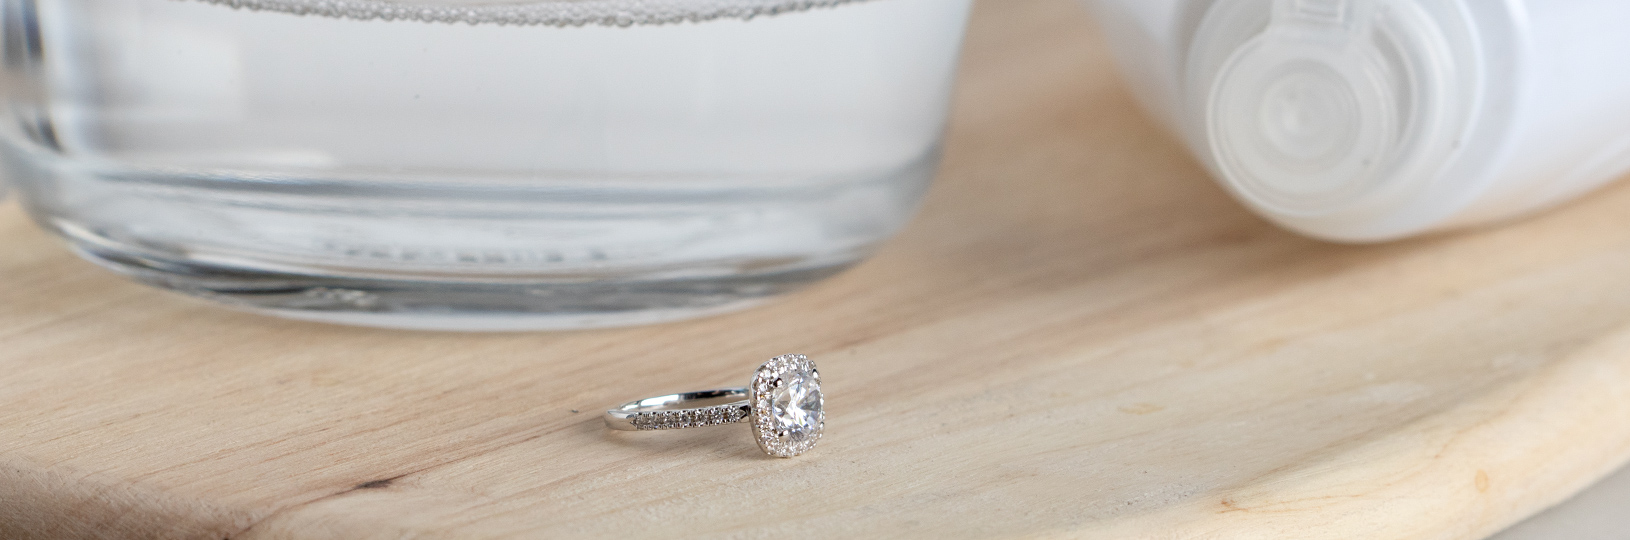 How To Clean A Diamond Ring At Home